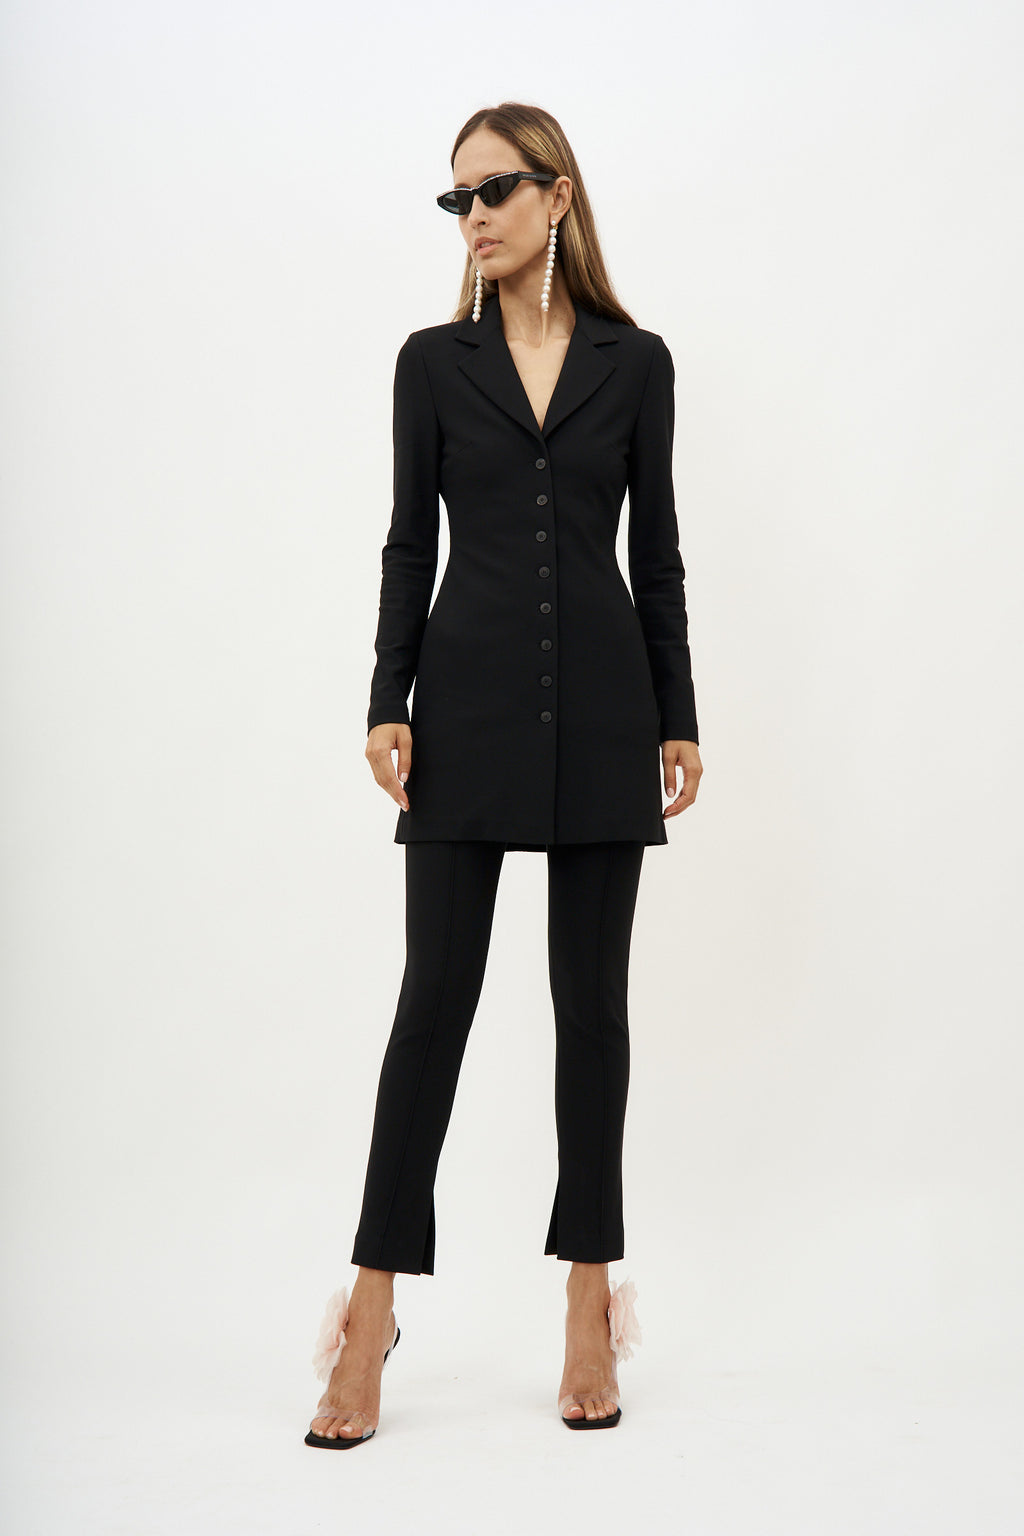 Knit Buttoned Black Peacoat